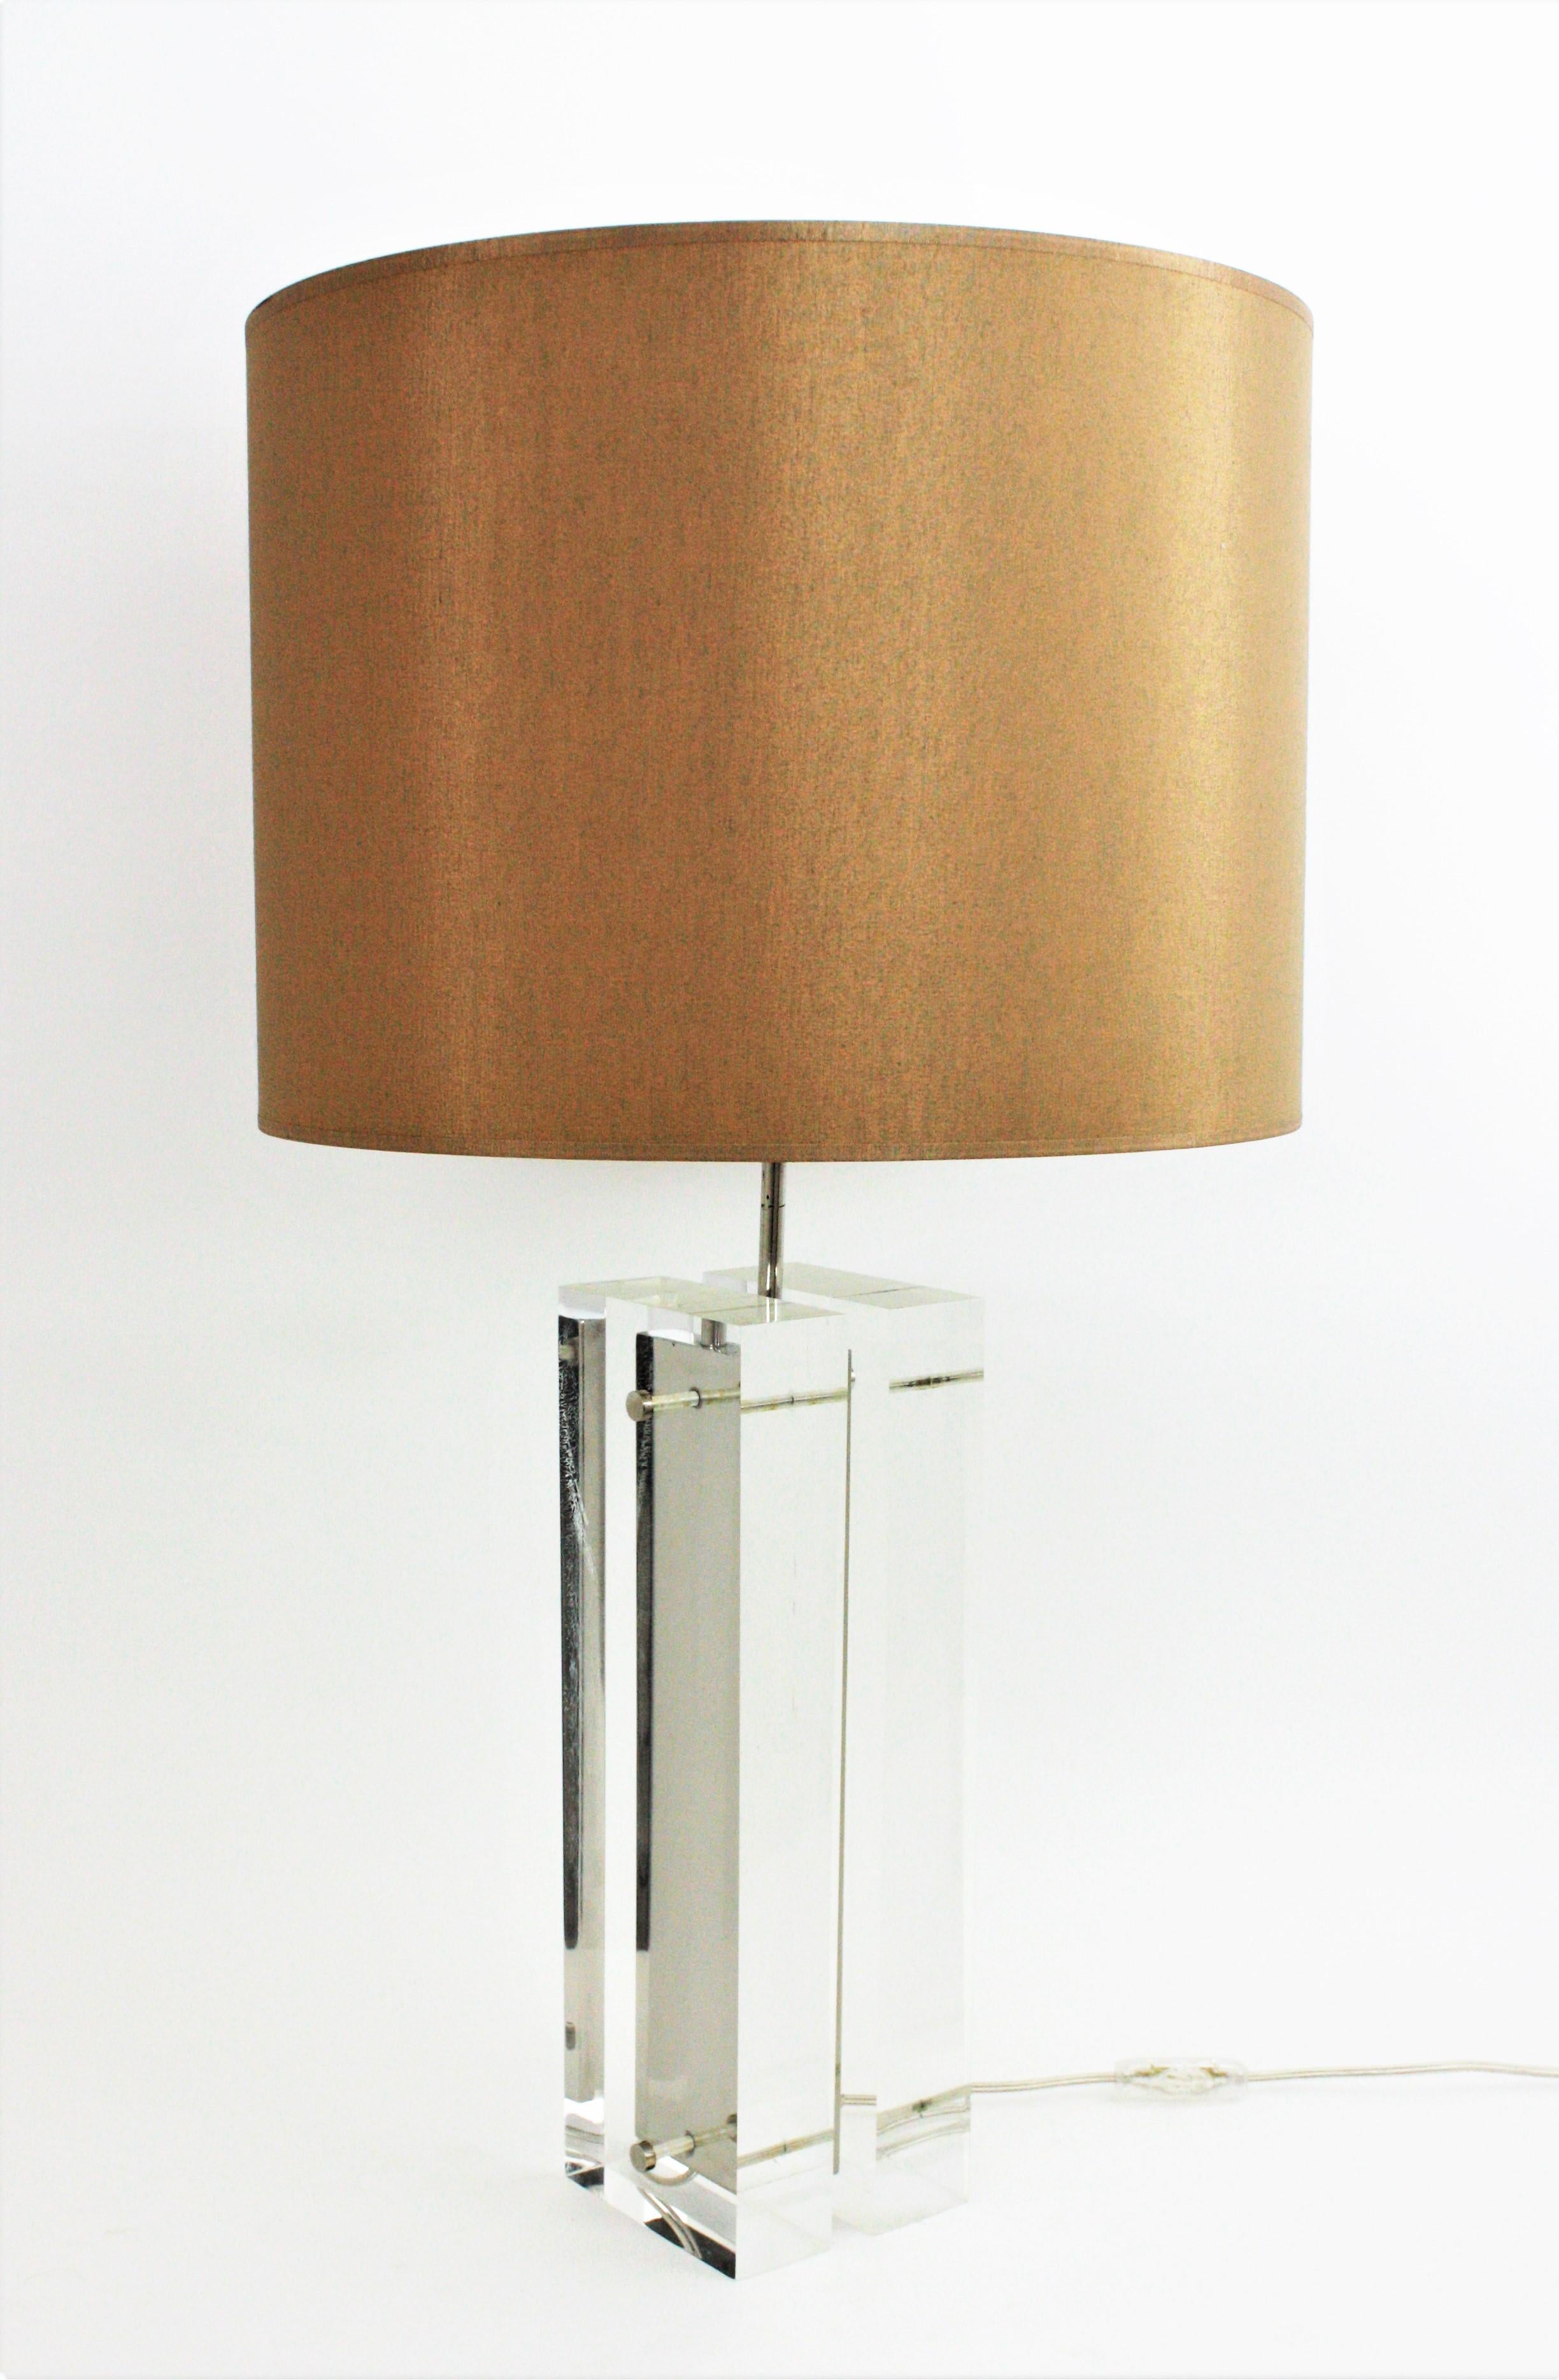 A large Lucite and chrome table lamp by Charles Hollis Jones. United States, 1970s.
This architectural table lamp features two thick Lucite blocks joined between them with a chromed steel panel.
The shade is not included.
Newly wired with an E27